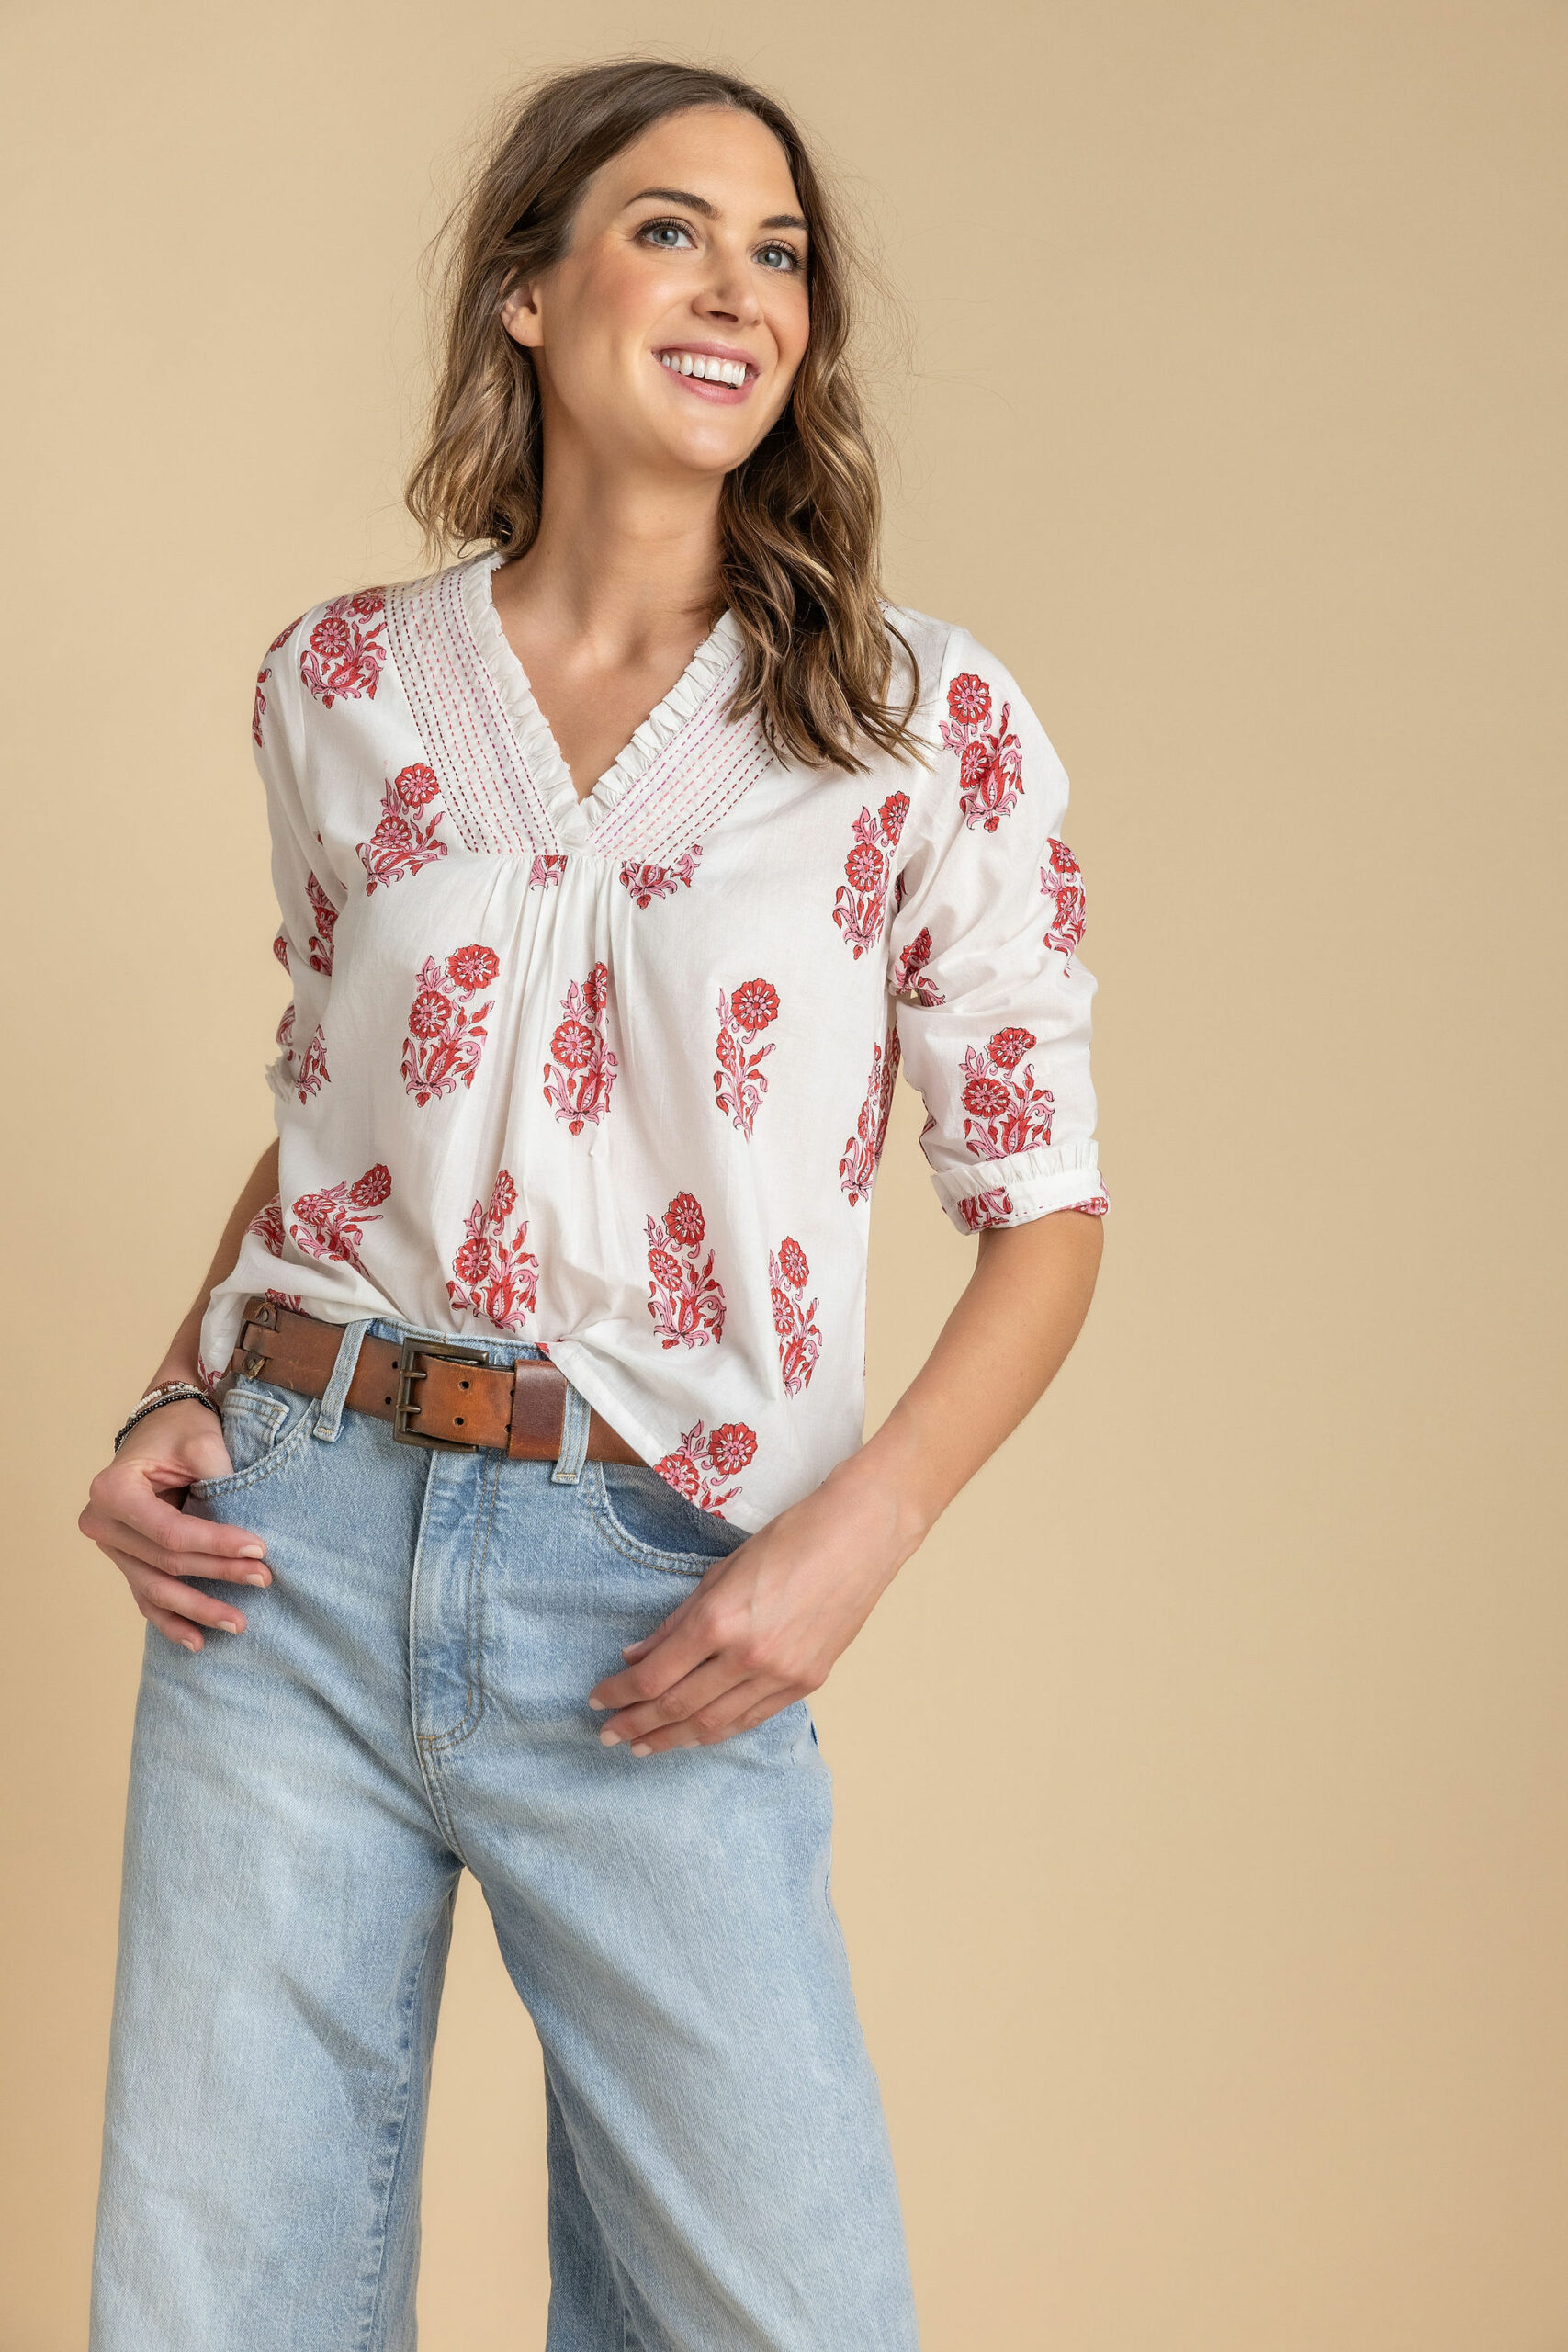 Rigby Red and White Cotton Top - Amaya Textiles